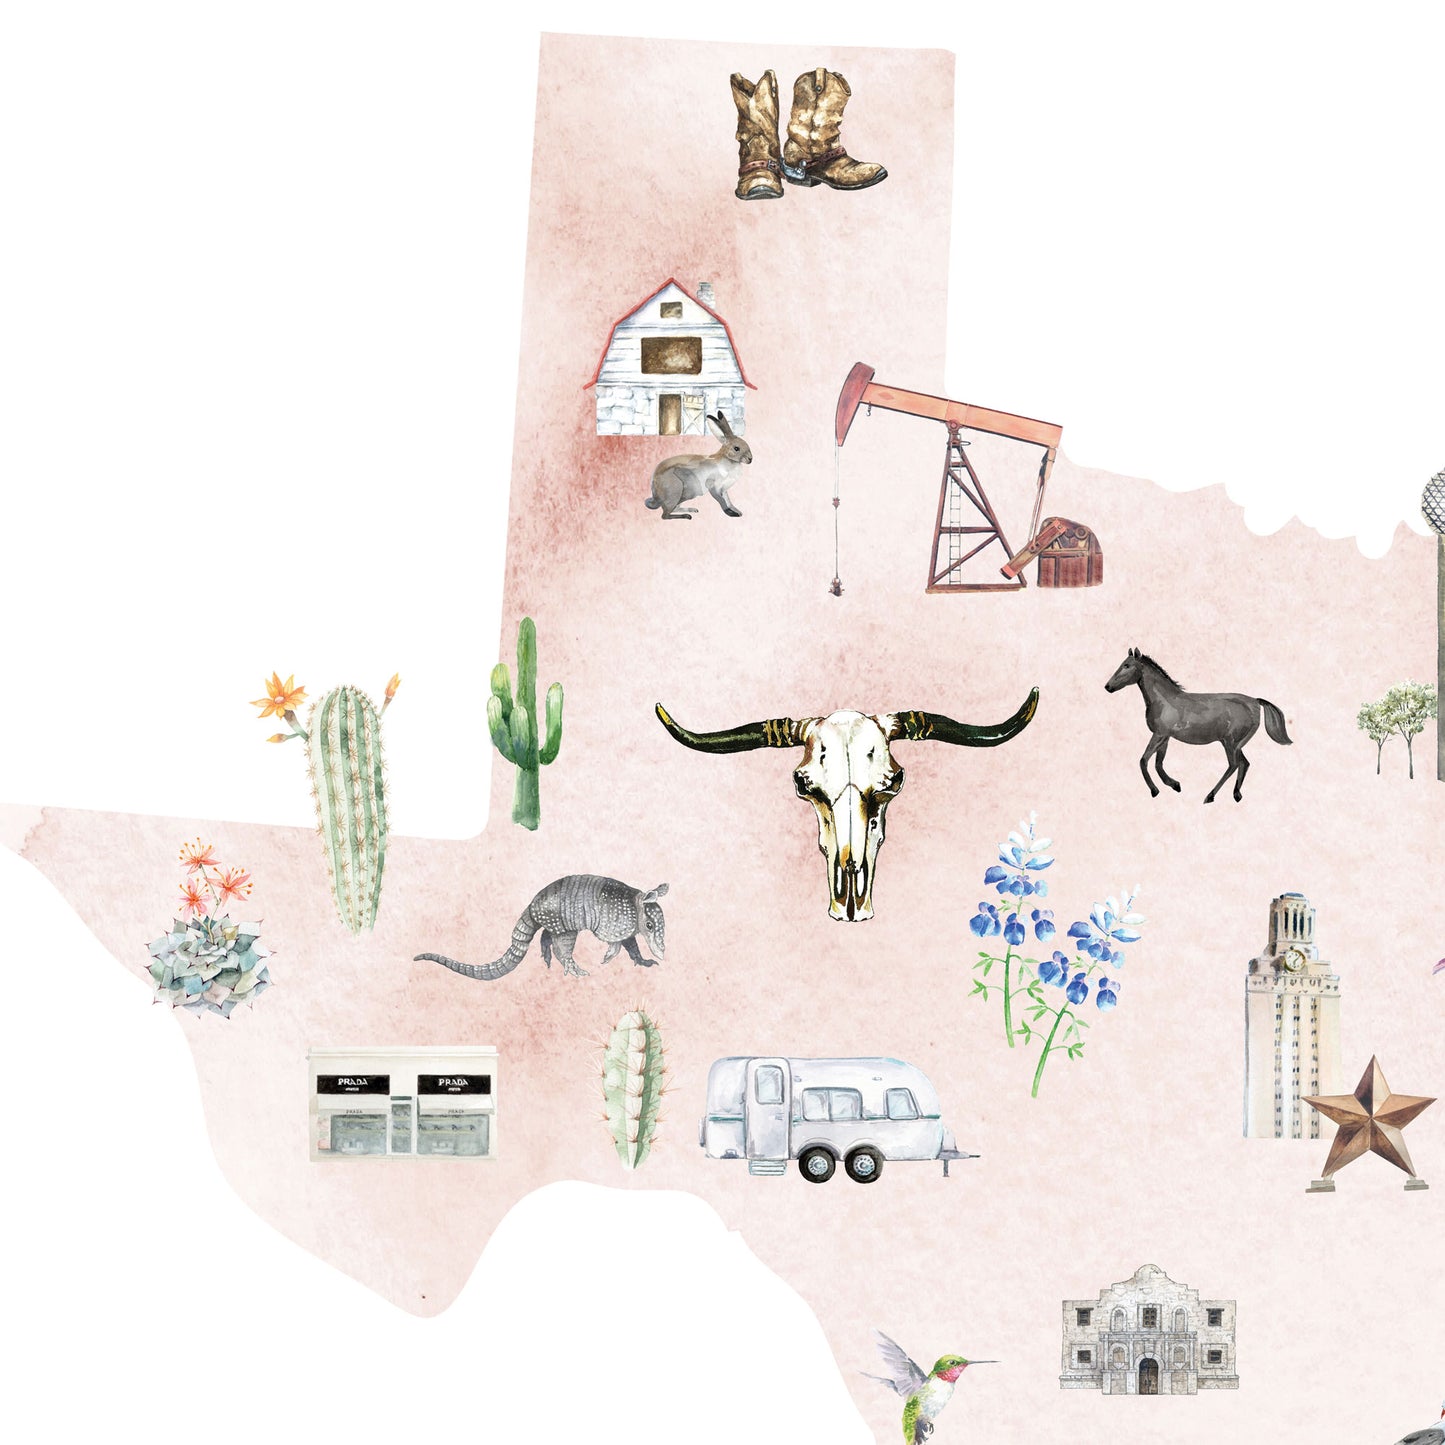 Texas Illustrated State Map Art Print